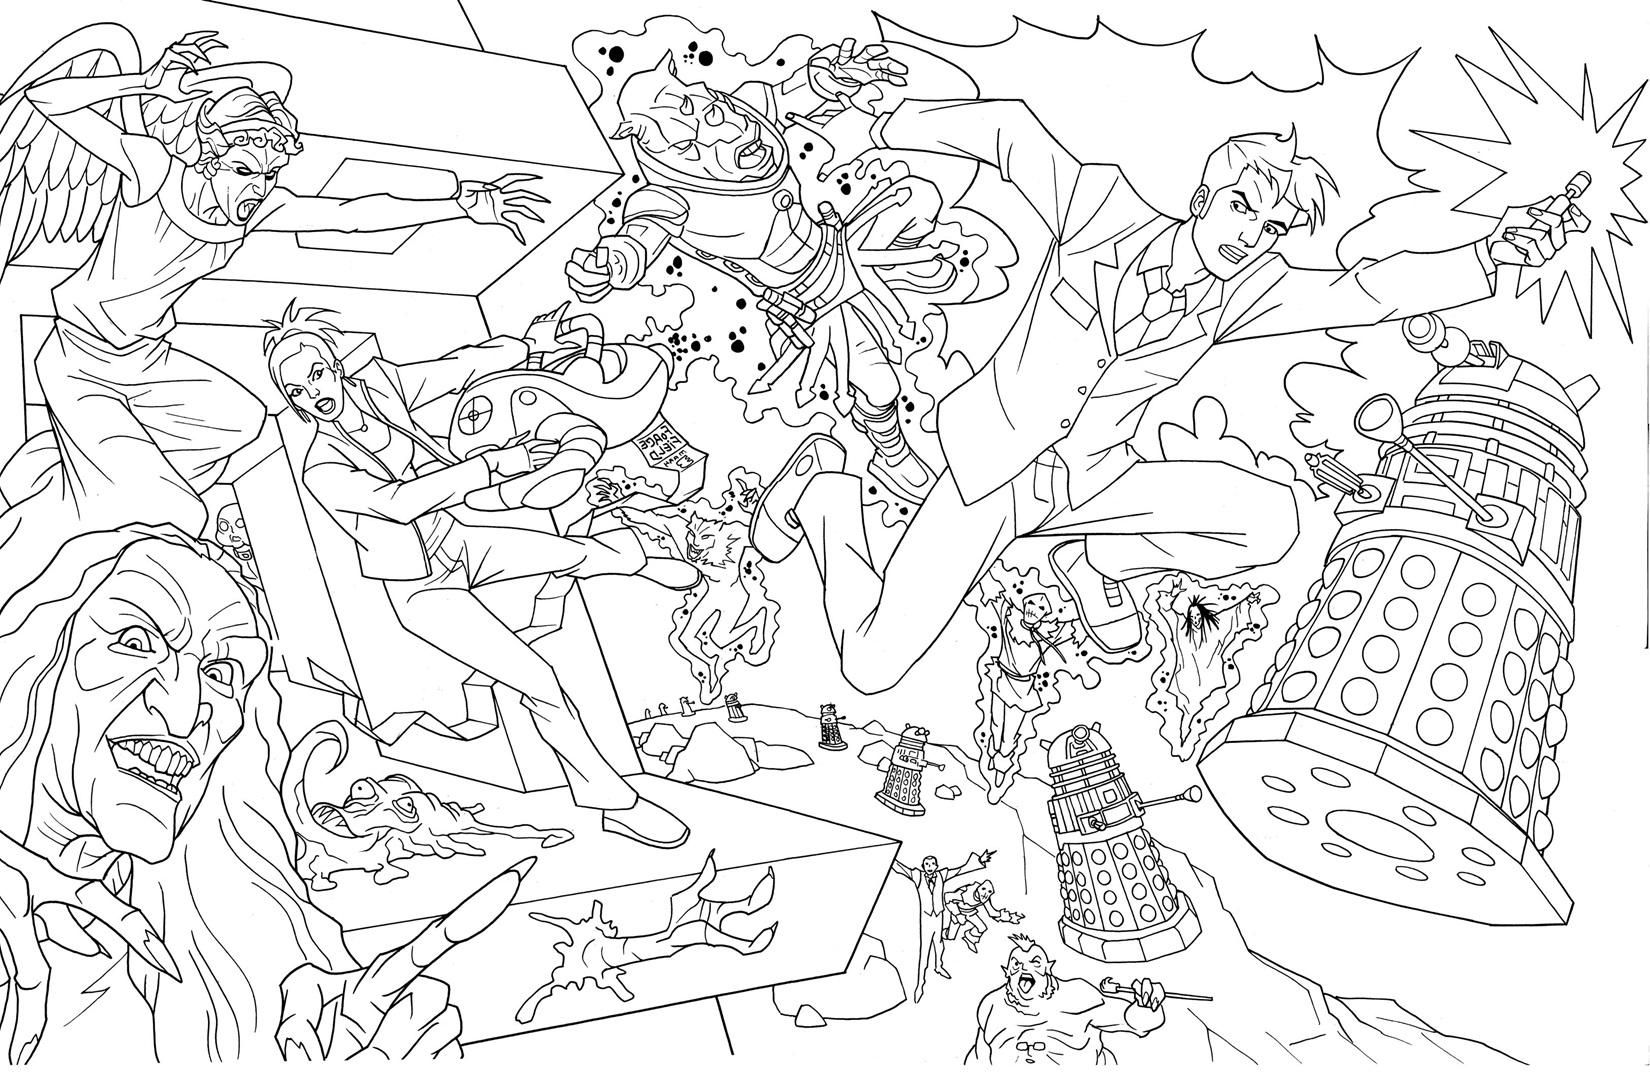 Doctor Who Coloring Pages Free #5 - Doctor Who Coloring Pages ...